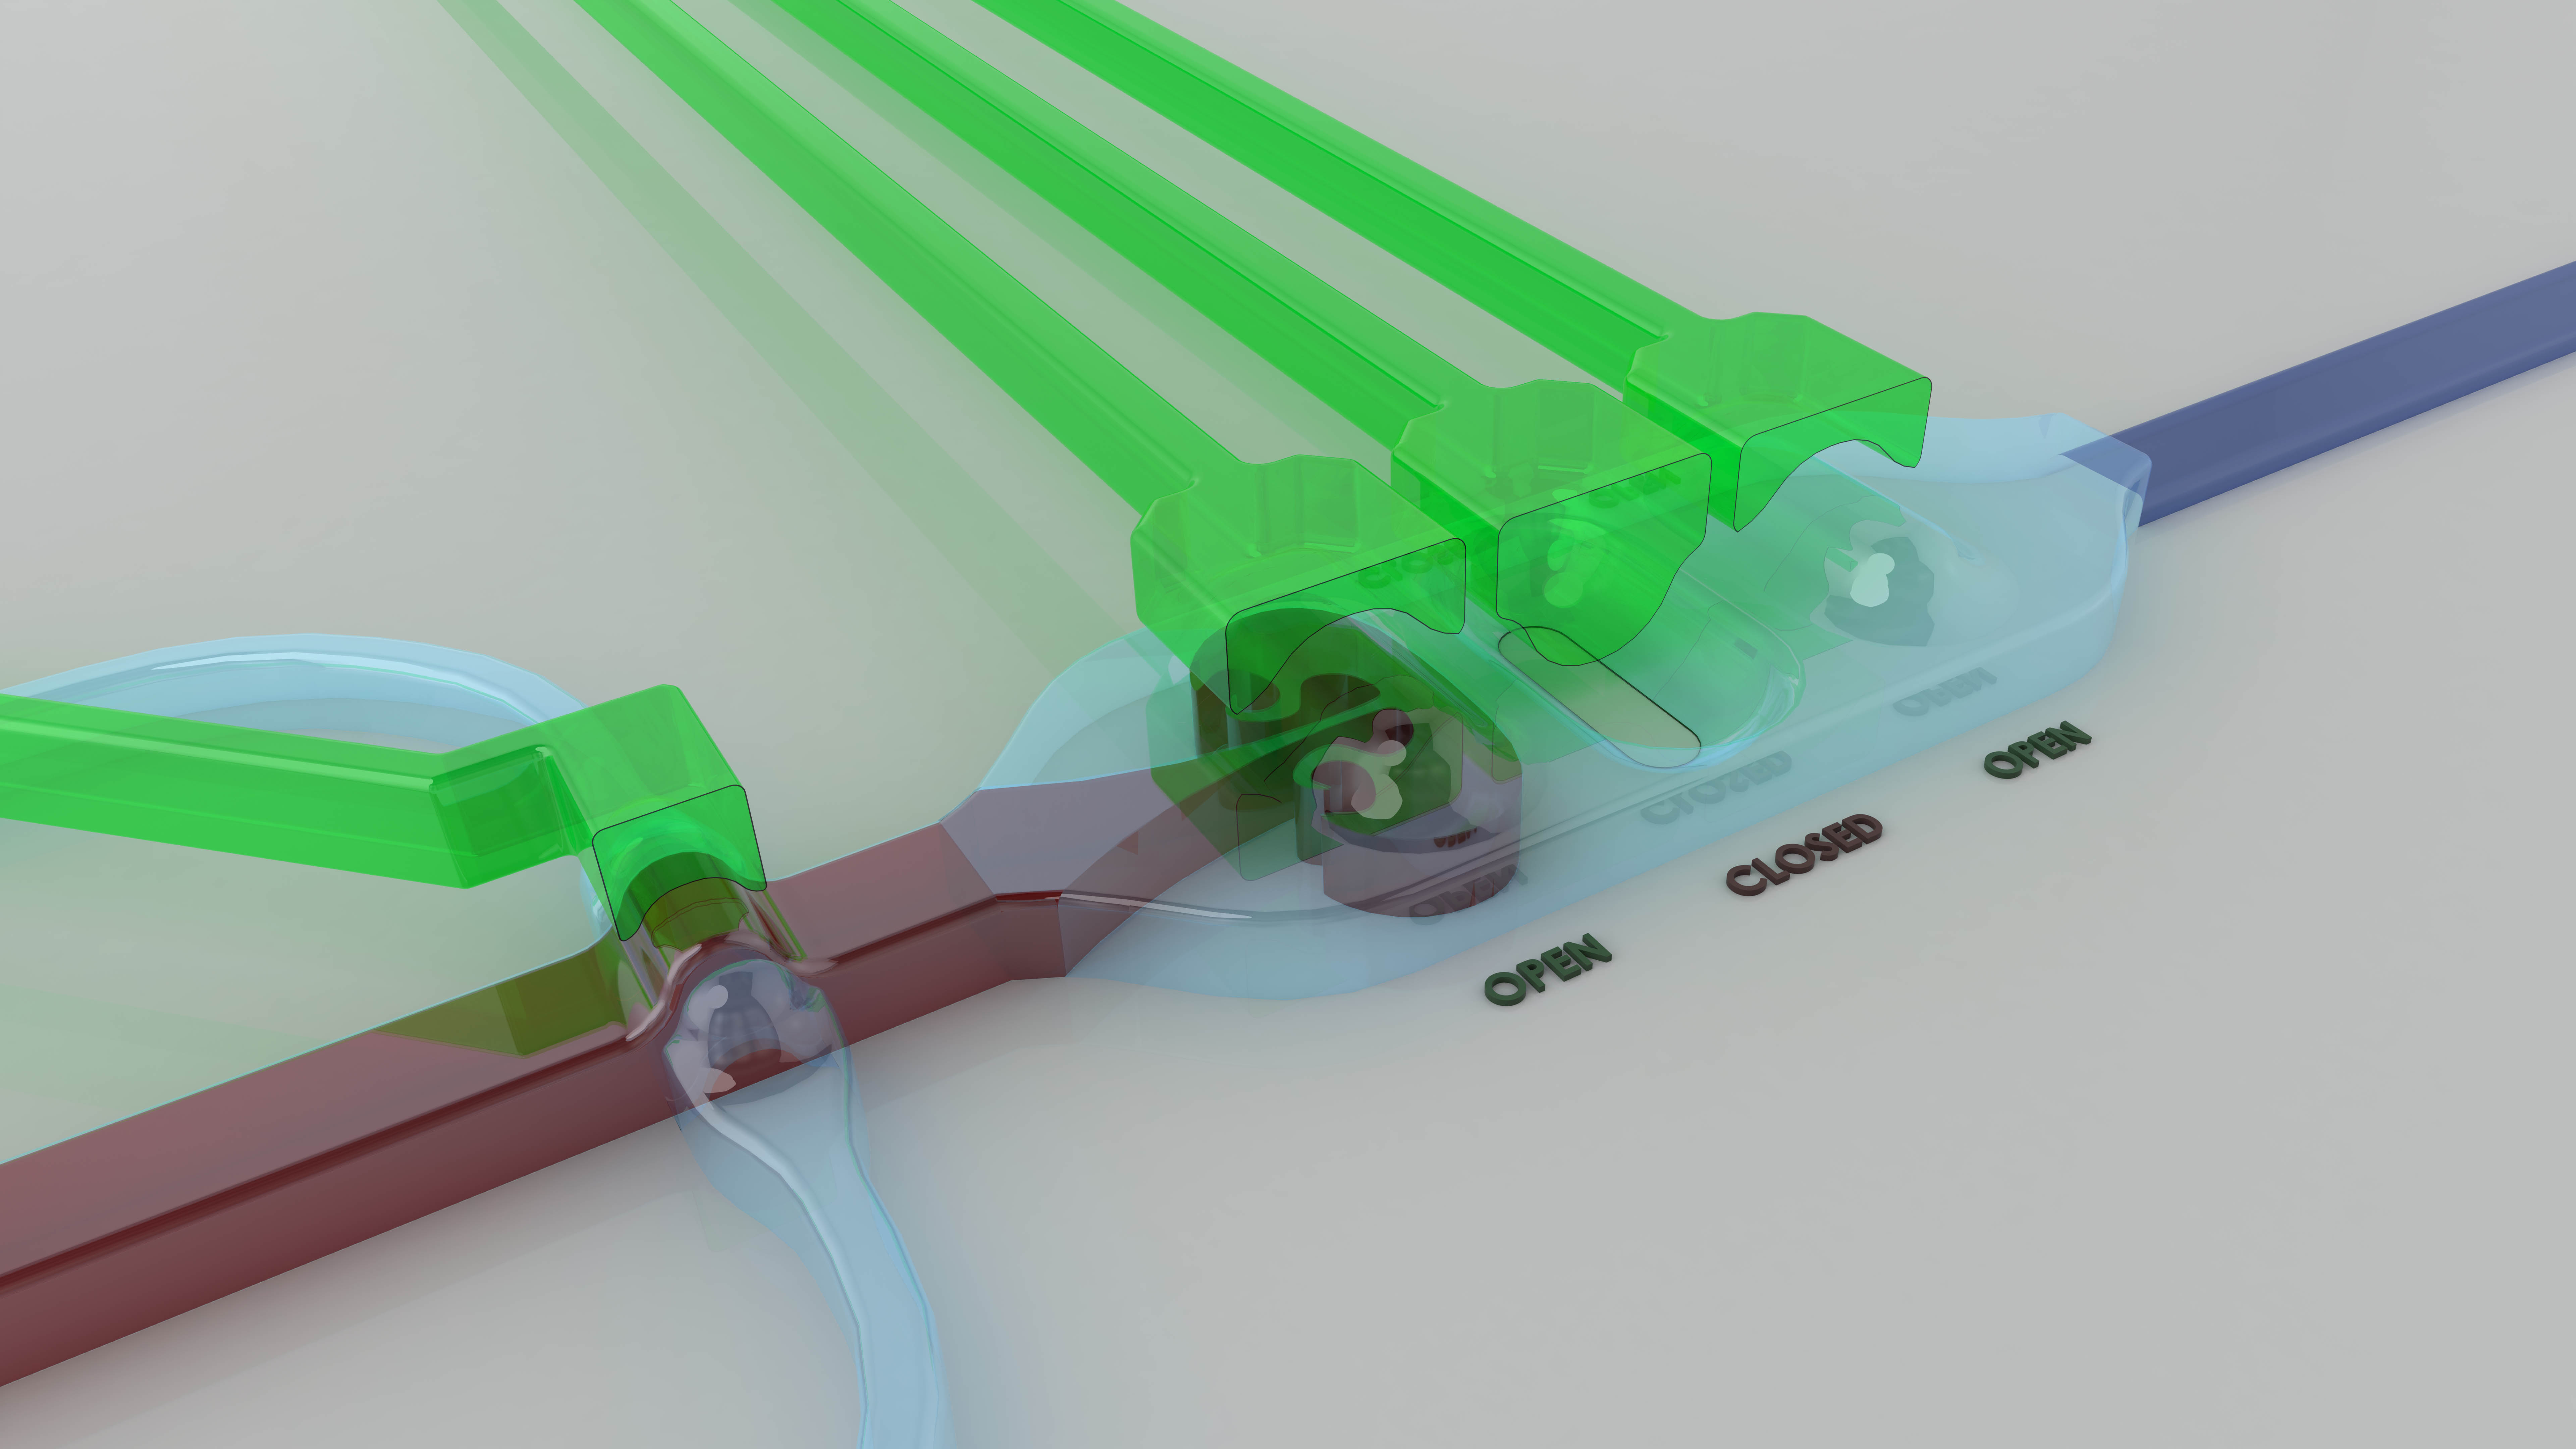 Graphic showing the microfluidic chip, which features a unique system of tiny channels and pumps for rapidly manipulating fluids.